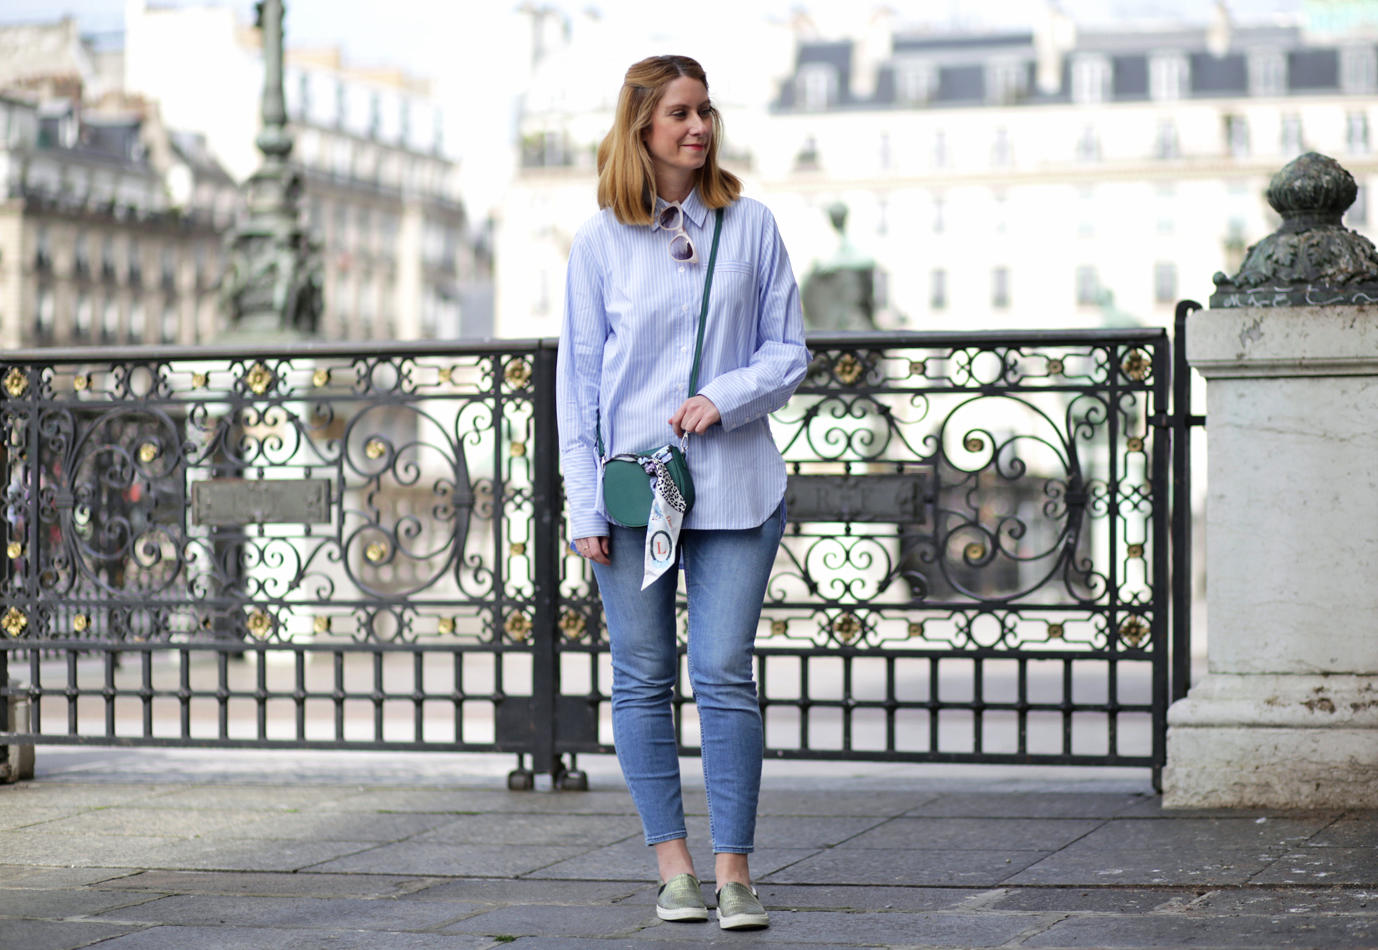 Green and light blue outfit - spring look